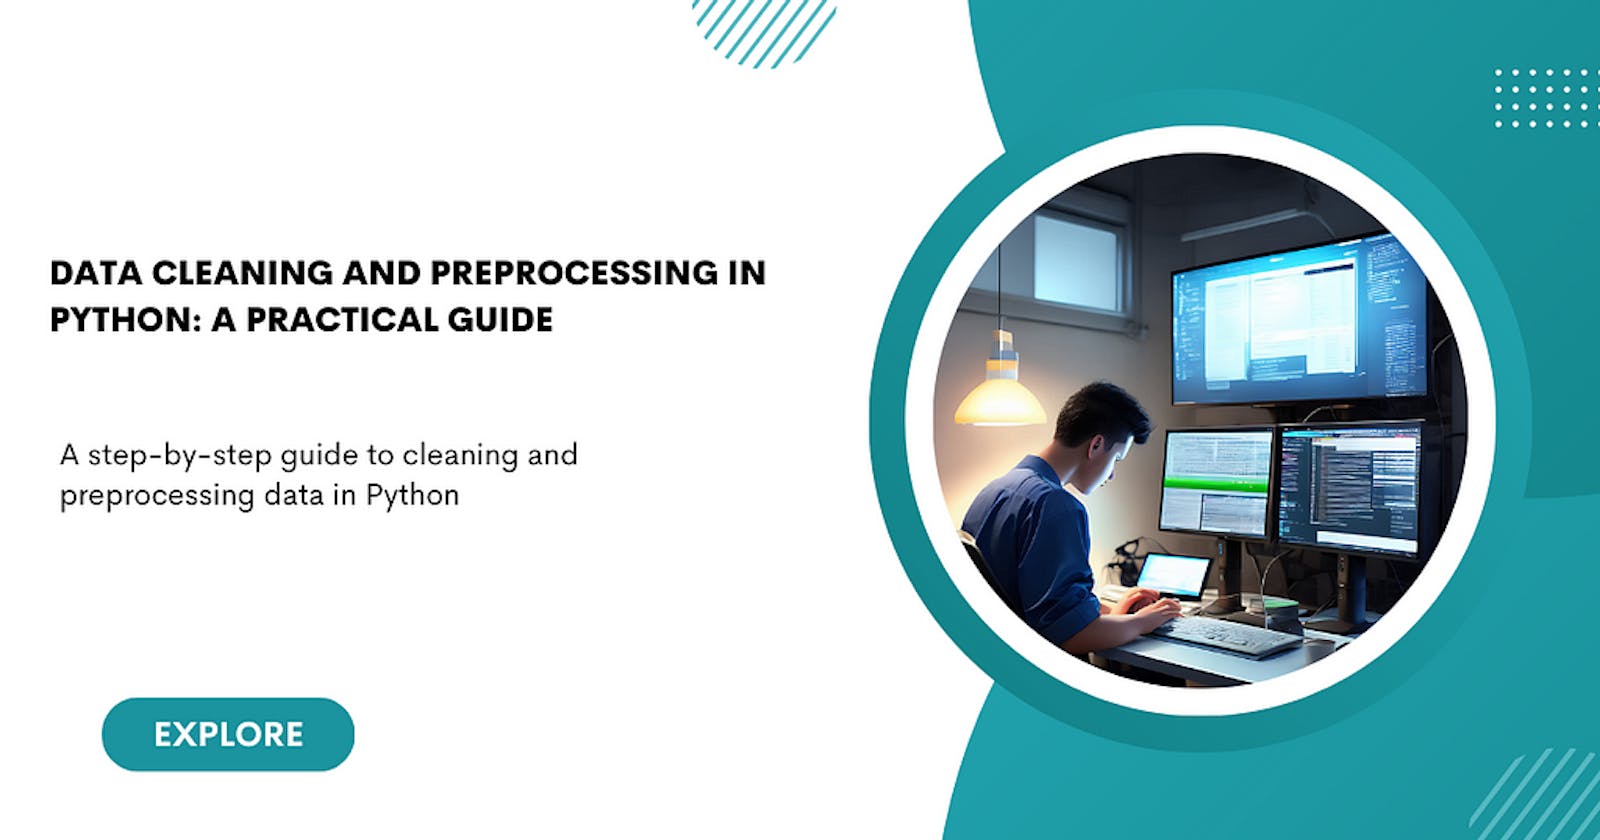 Data Cleaning and Preprocessing in Python: A Practical Guide